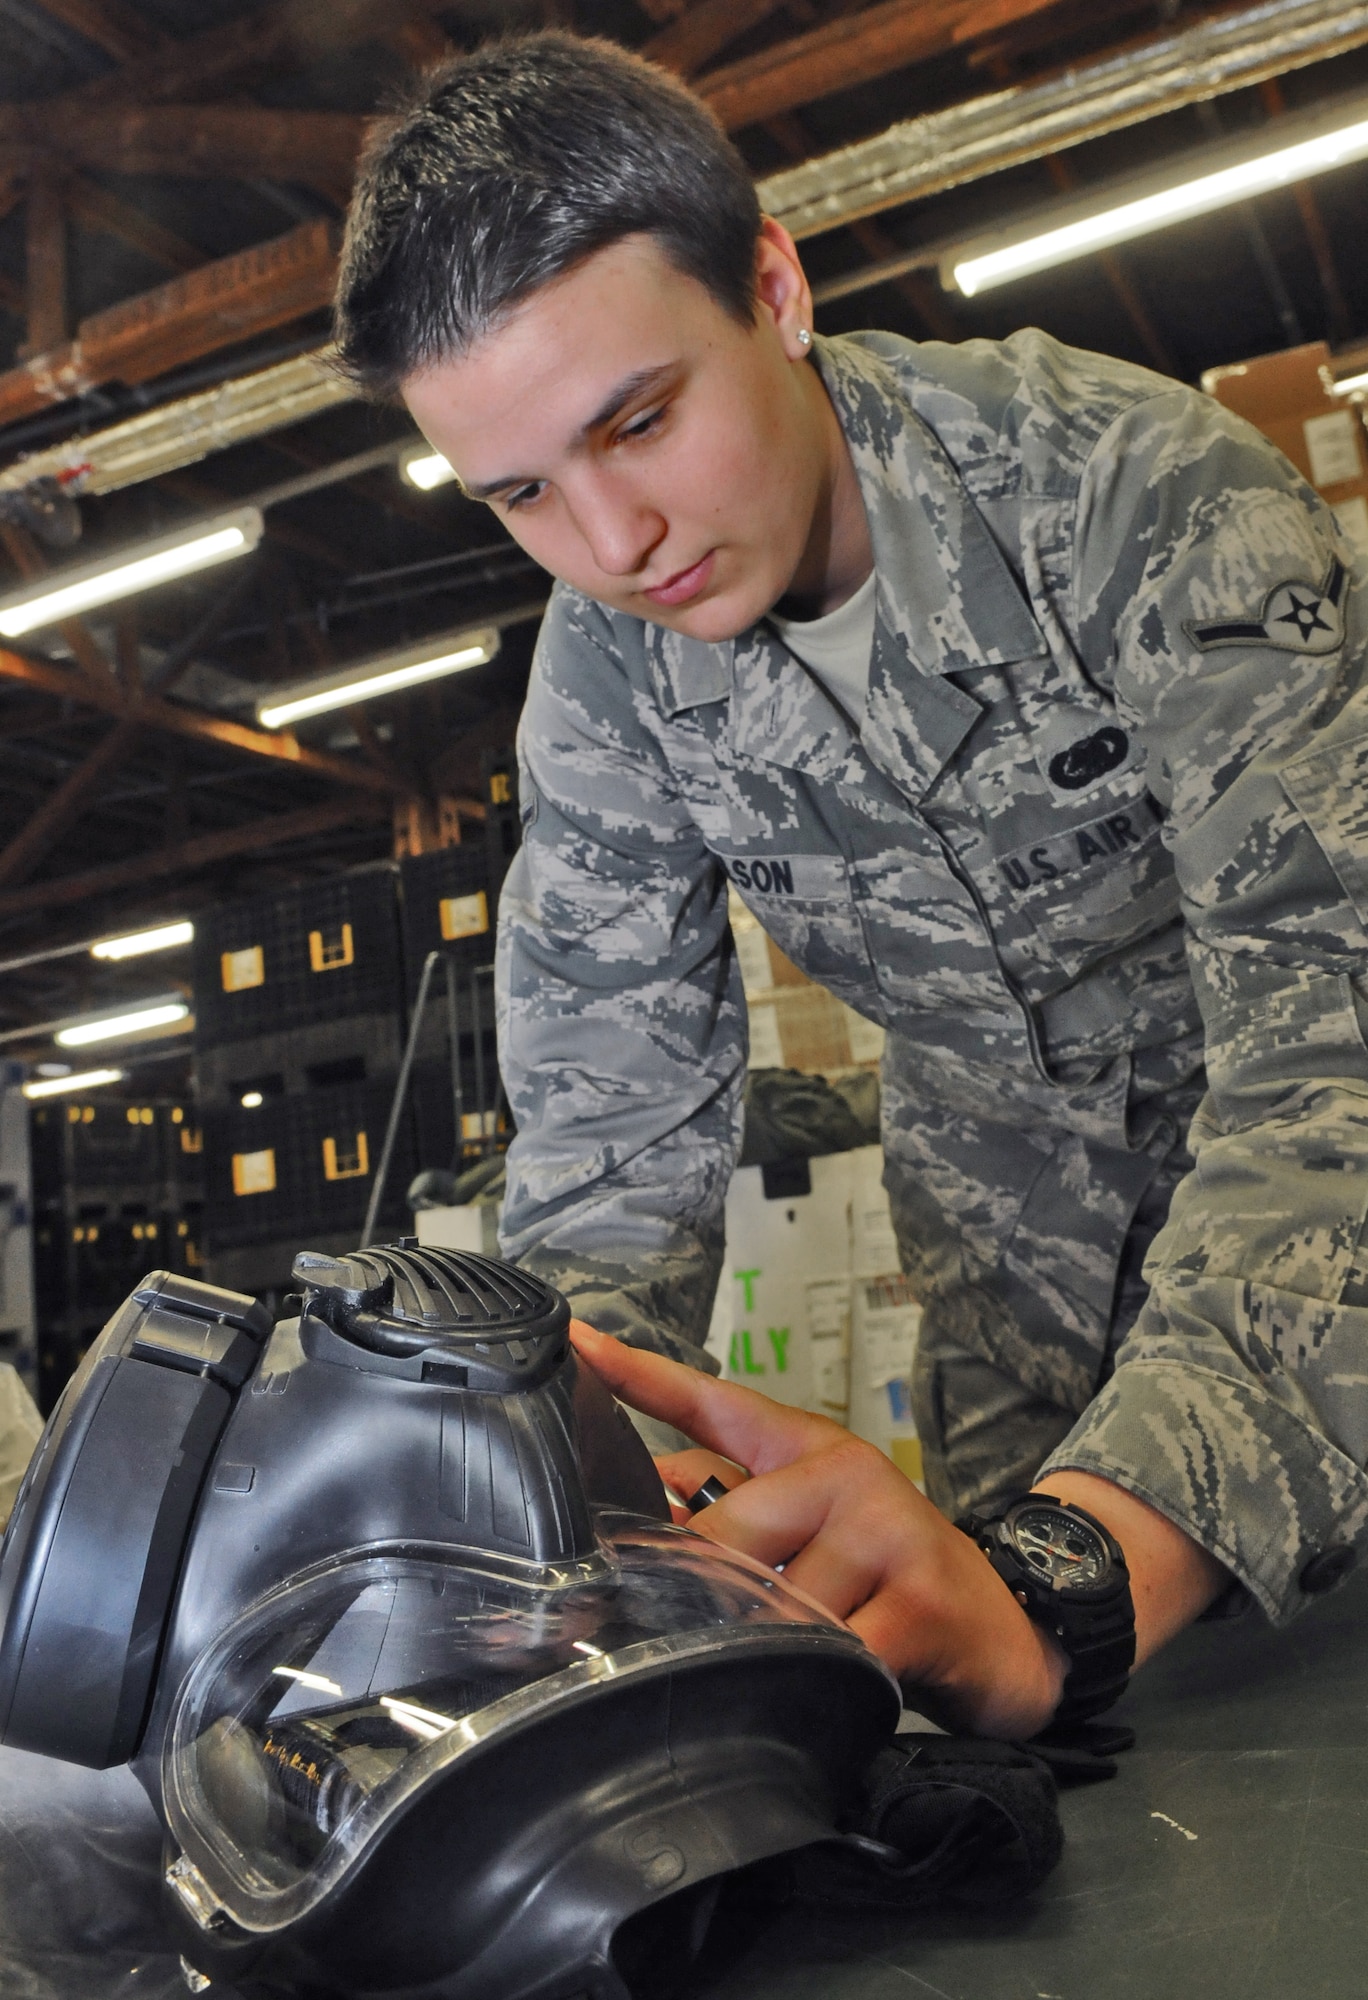 SPANGDAHLEM AIR BASE, Germany – Airman Brooke Wilson, 52nd Logistics Readiness Squadron individual protective equipment apprentice, annotates the serial number of a gas mask during a 100 percent equipment inventory at the mobility warehouse June 7. The inventory was one step of a web migration checklist issued by U.S. Air Forces in Europe will take place July 5-22.. (U.S. Air Force photo/Senior Airman Nick Wilson)